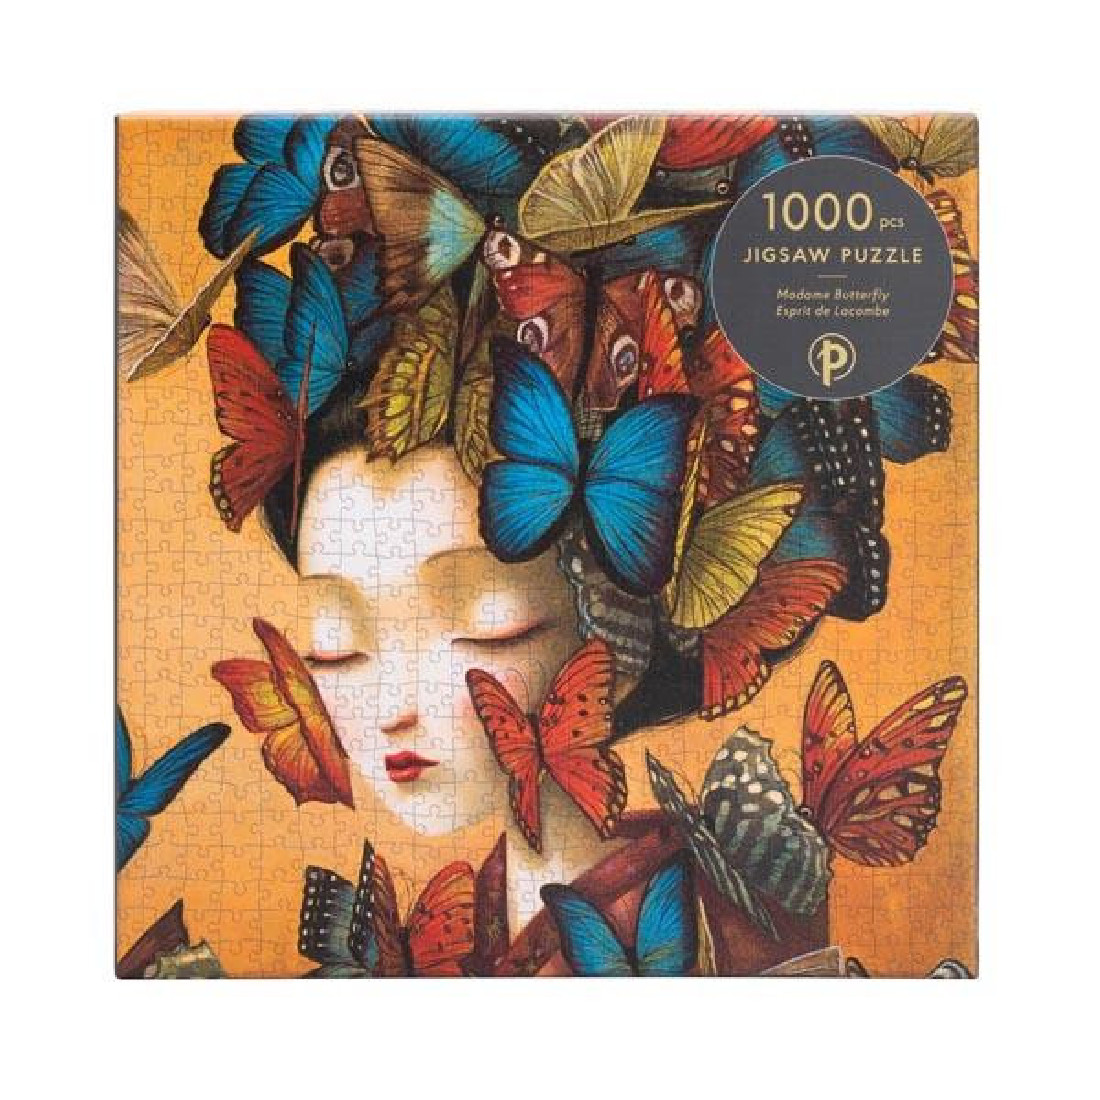 Puzzle 1000pcs Madame Butterfly Jigsaw P81456 Paperblanks